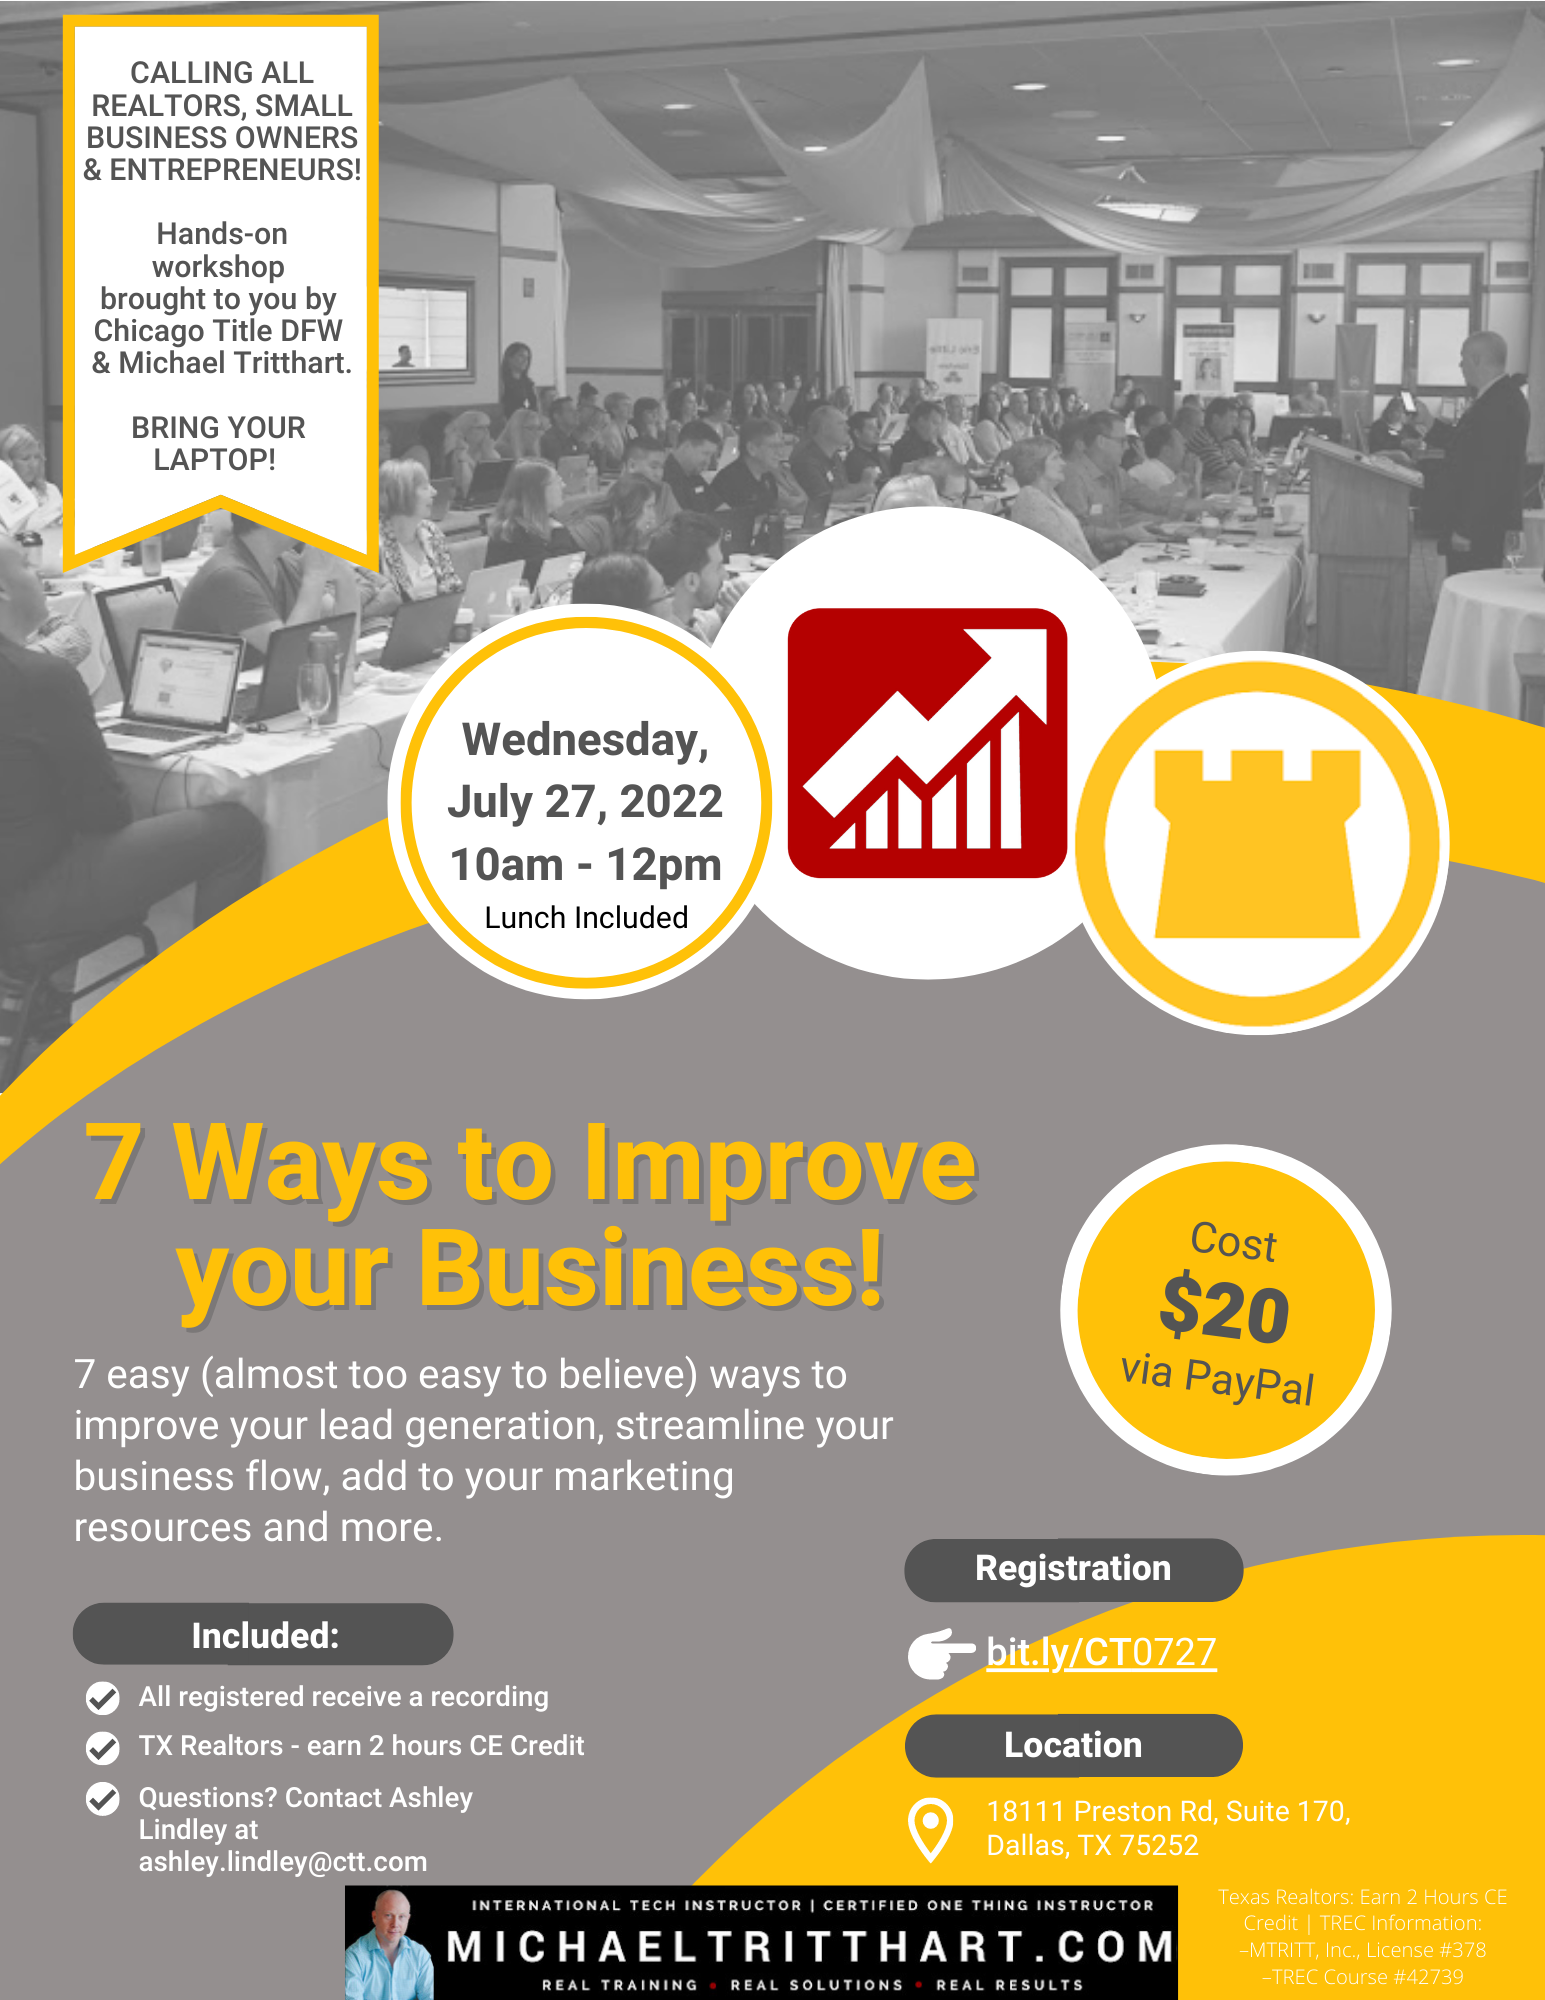 7 Ways to Improve Your Business